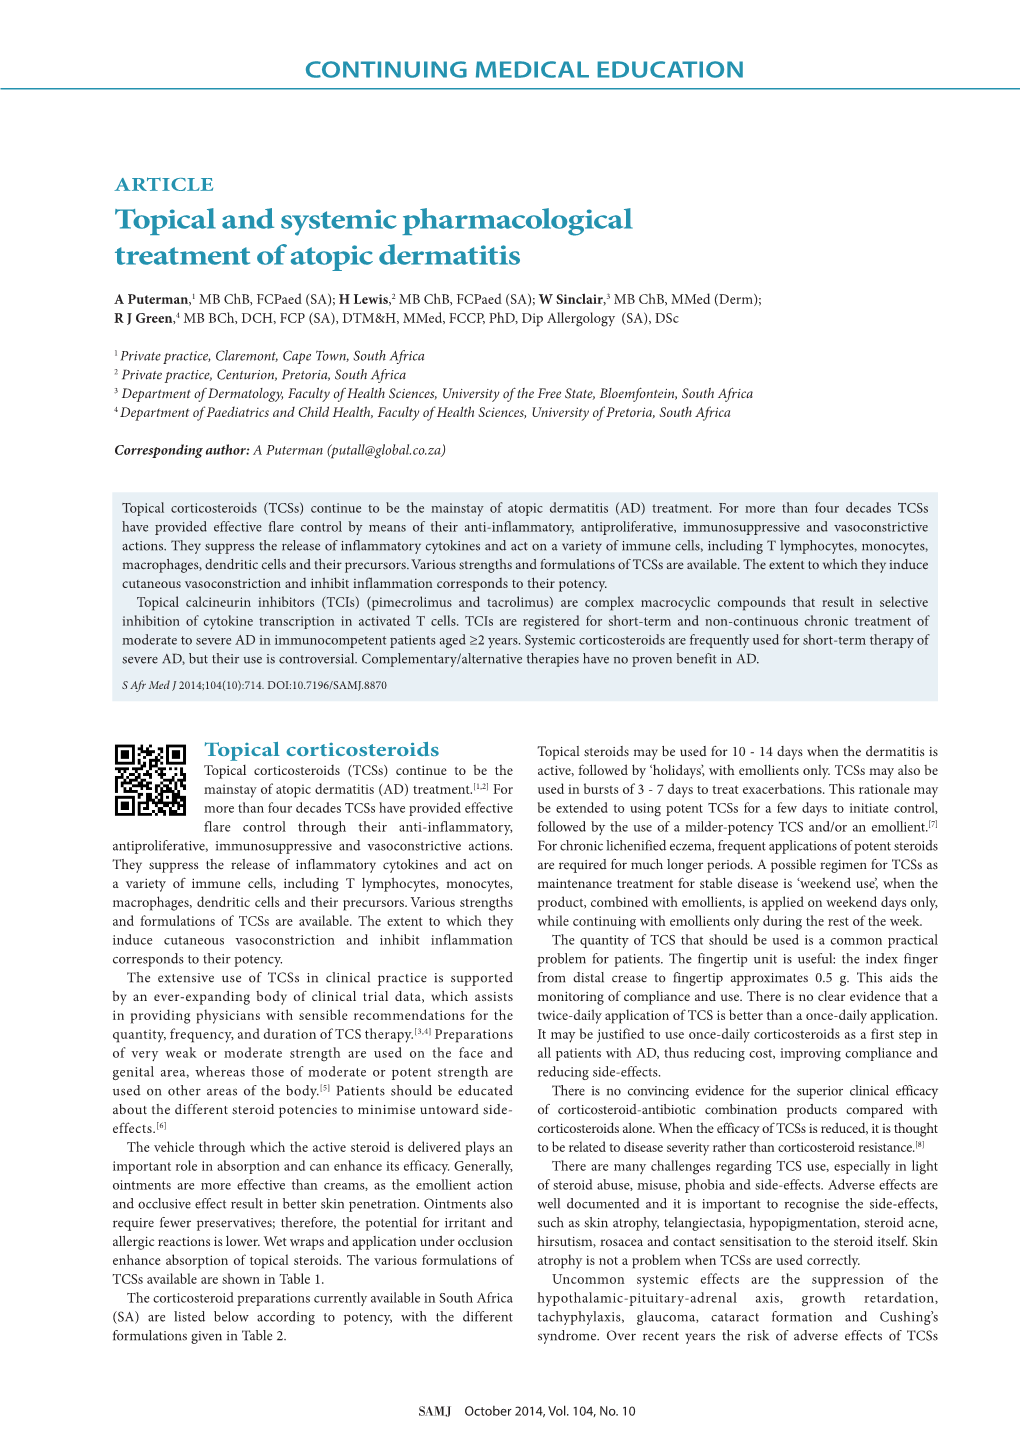 Topical and Systemic Pharmacological Treatment of Atopic Dermatitis